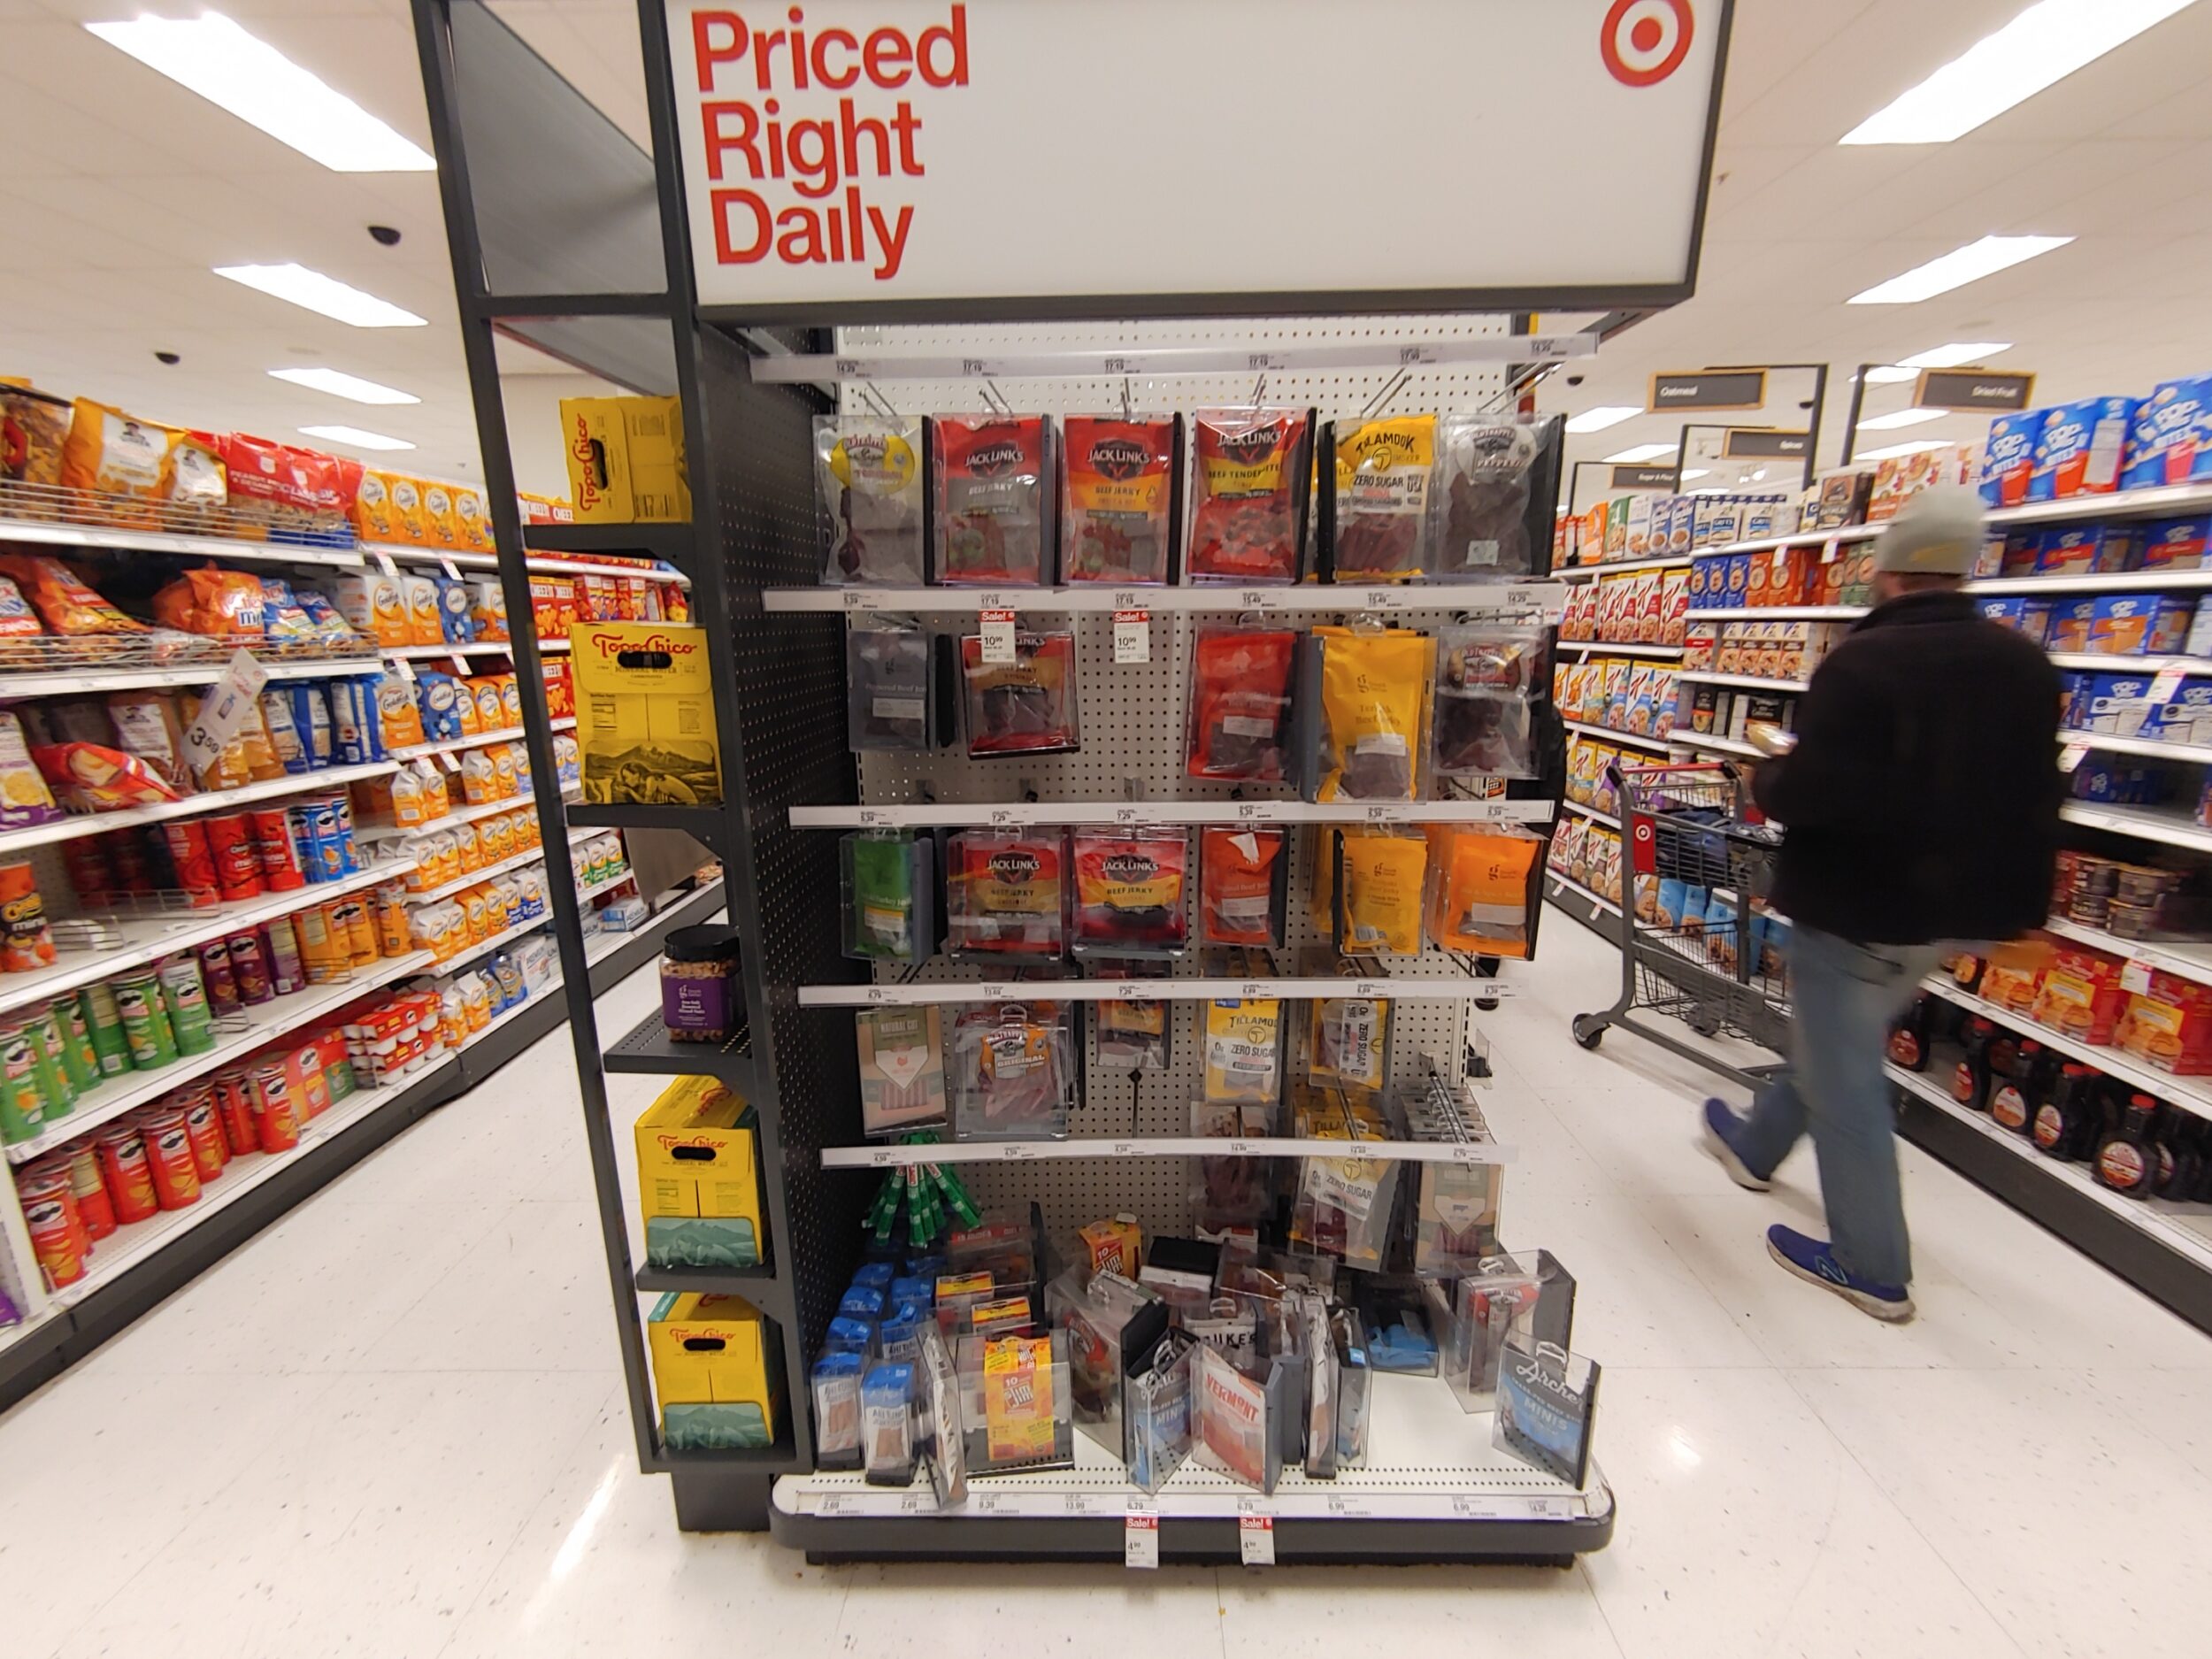 Bags of beef jerky are locked in plastic cases at the Target store in San Francisco's Metreon.